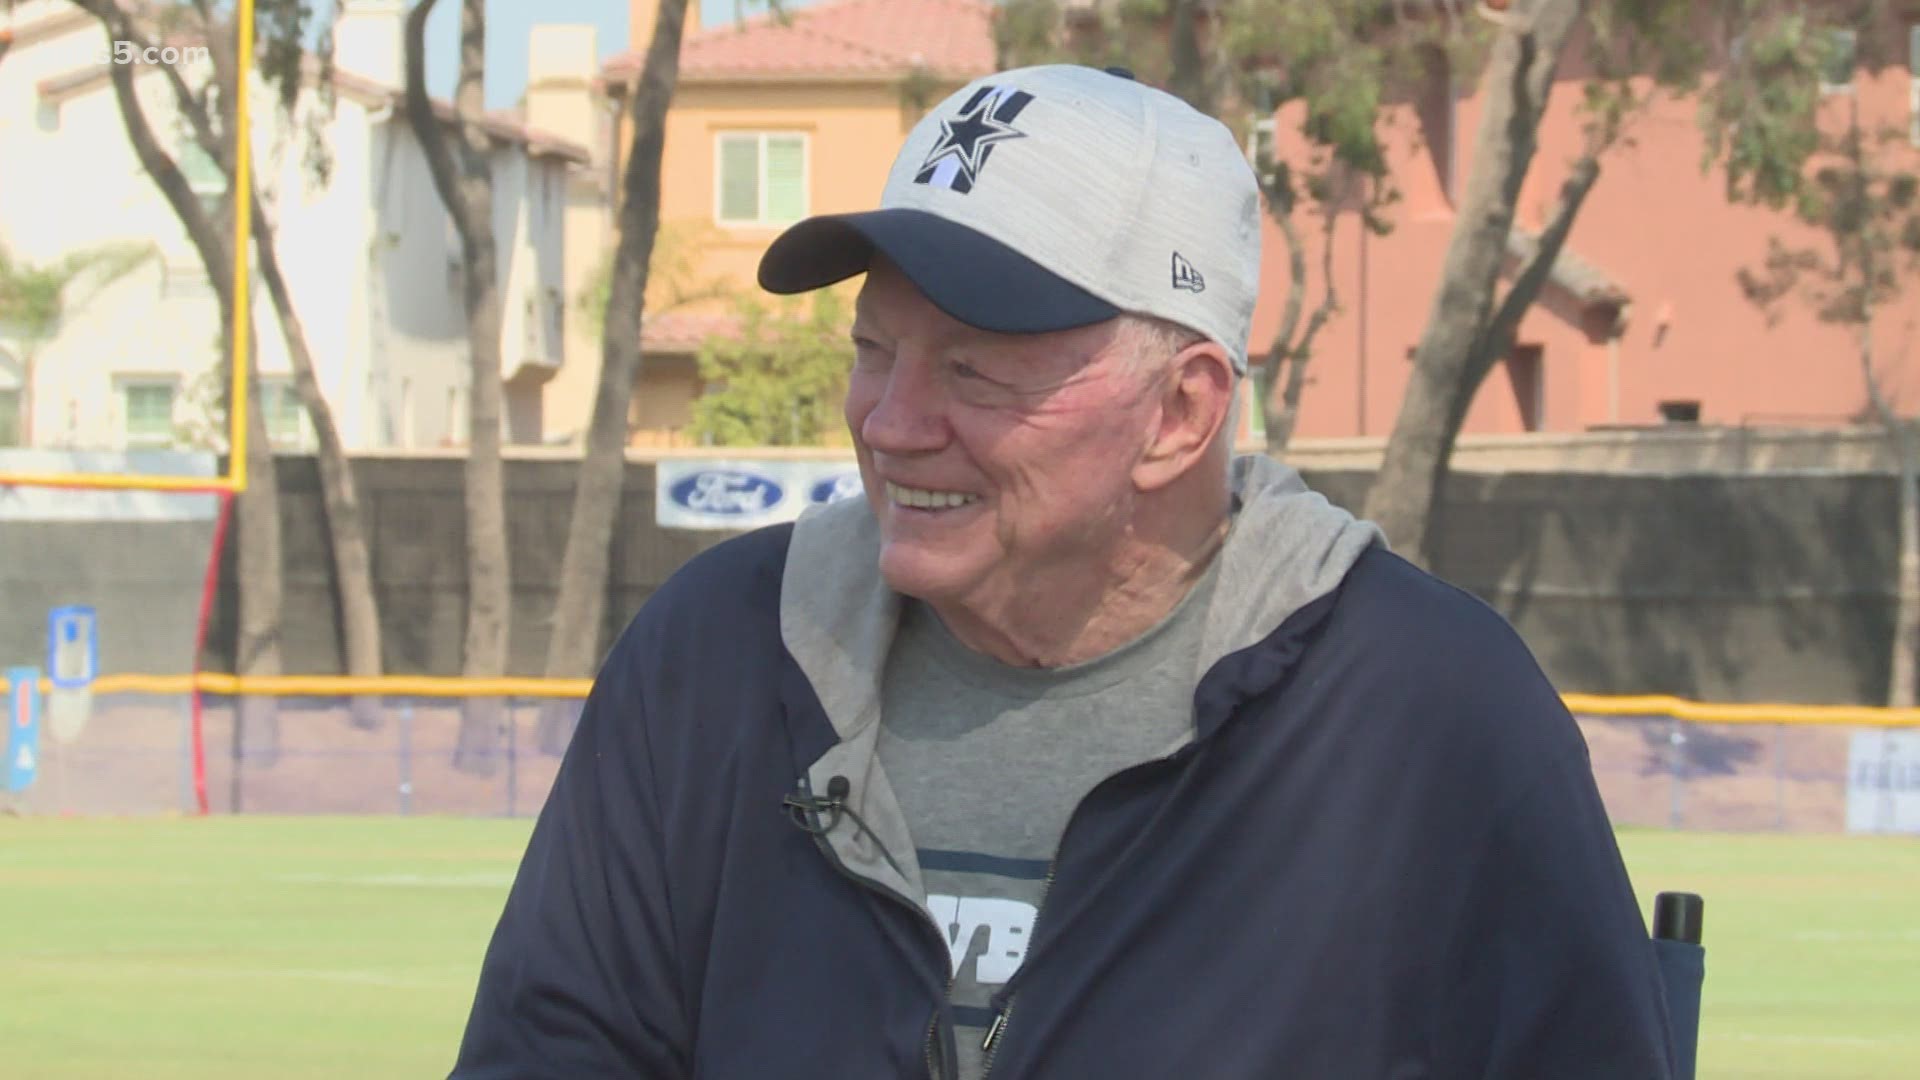 "I didn't realize how important camp and sharing the experience is until we didn't have it," Jones said in an interview with KENS 5 Sports Director Joe Reinagel.